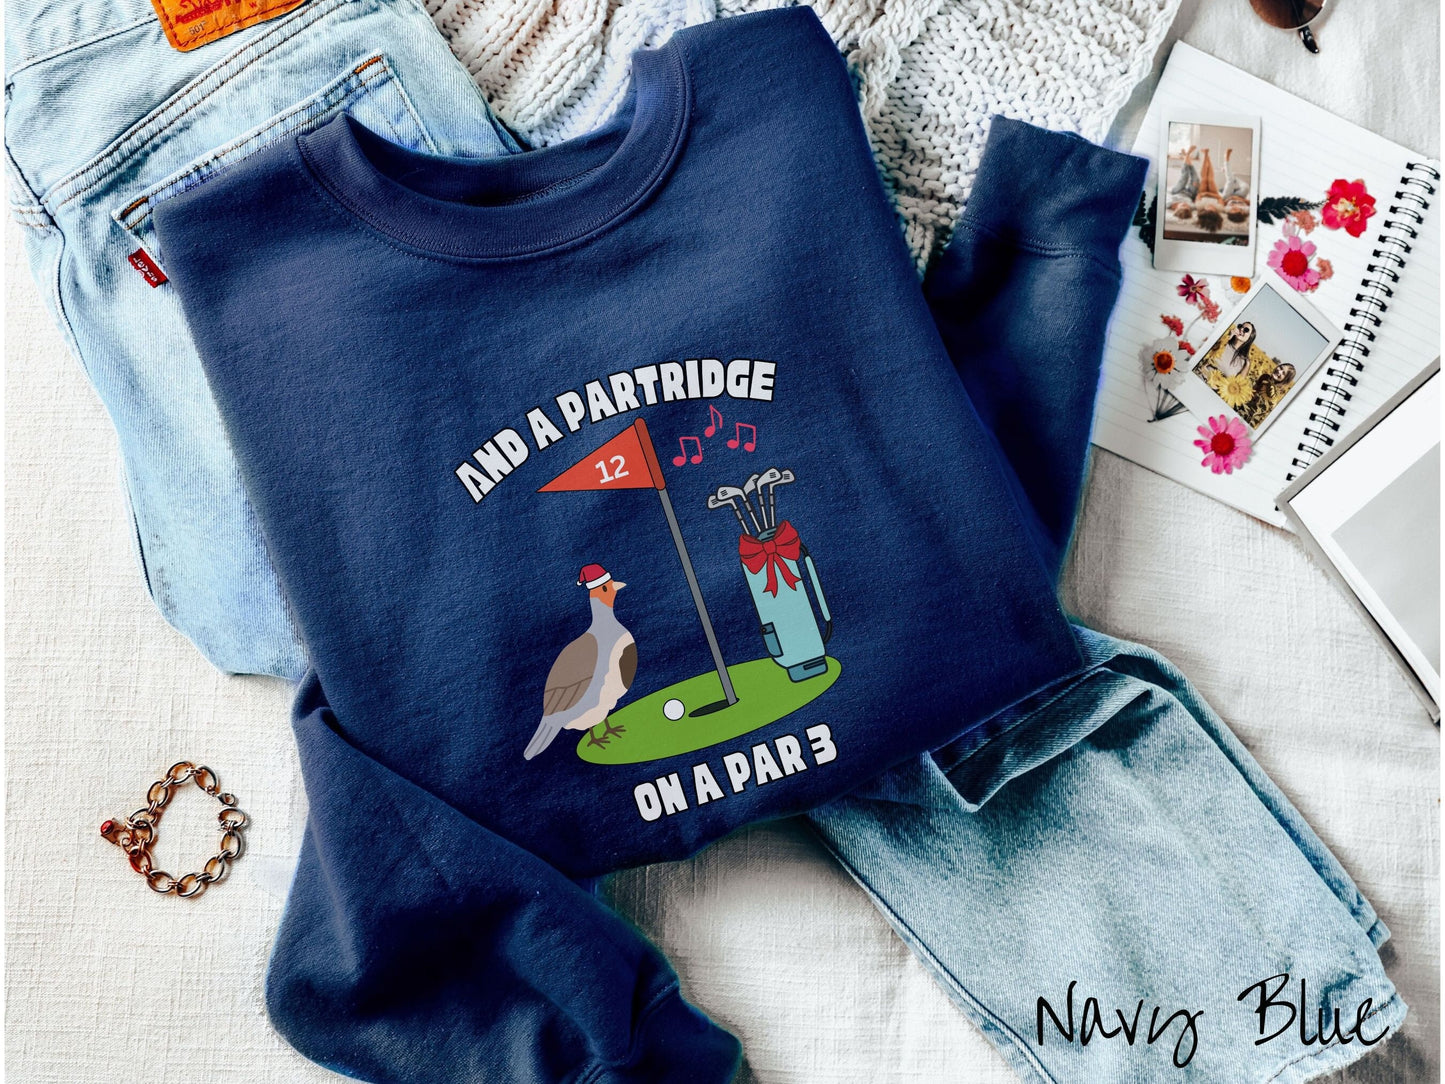 A cute navy blue colored sweatshirt with a partridge bird on a golf green next to a hole with a flag in it with #12 on it. There is also a set of golf clubs with a red bow and music playing in the air.